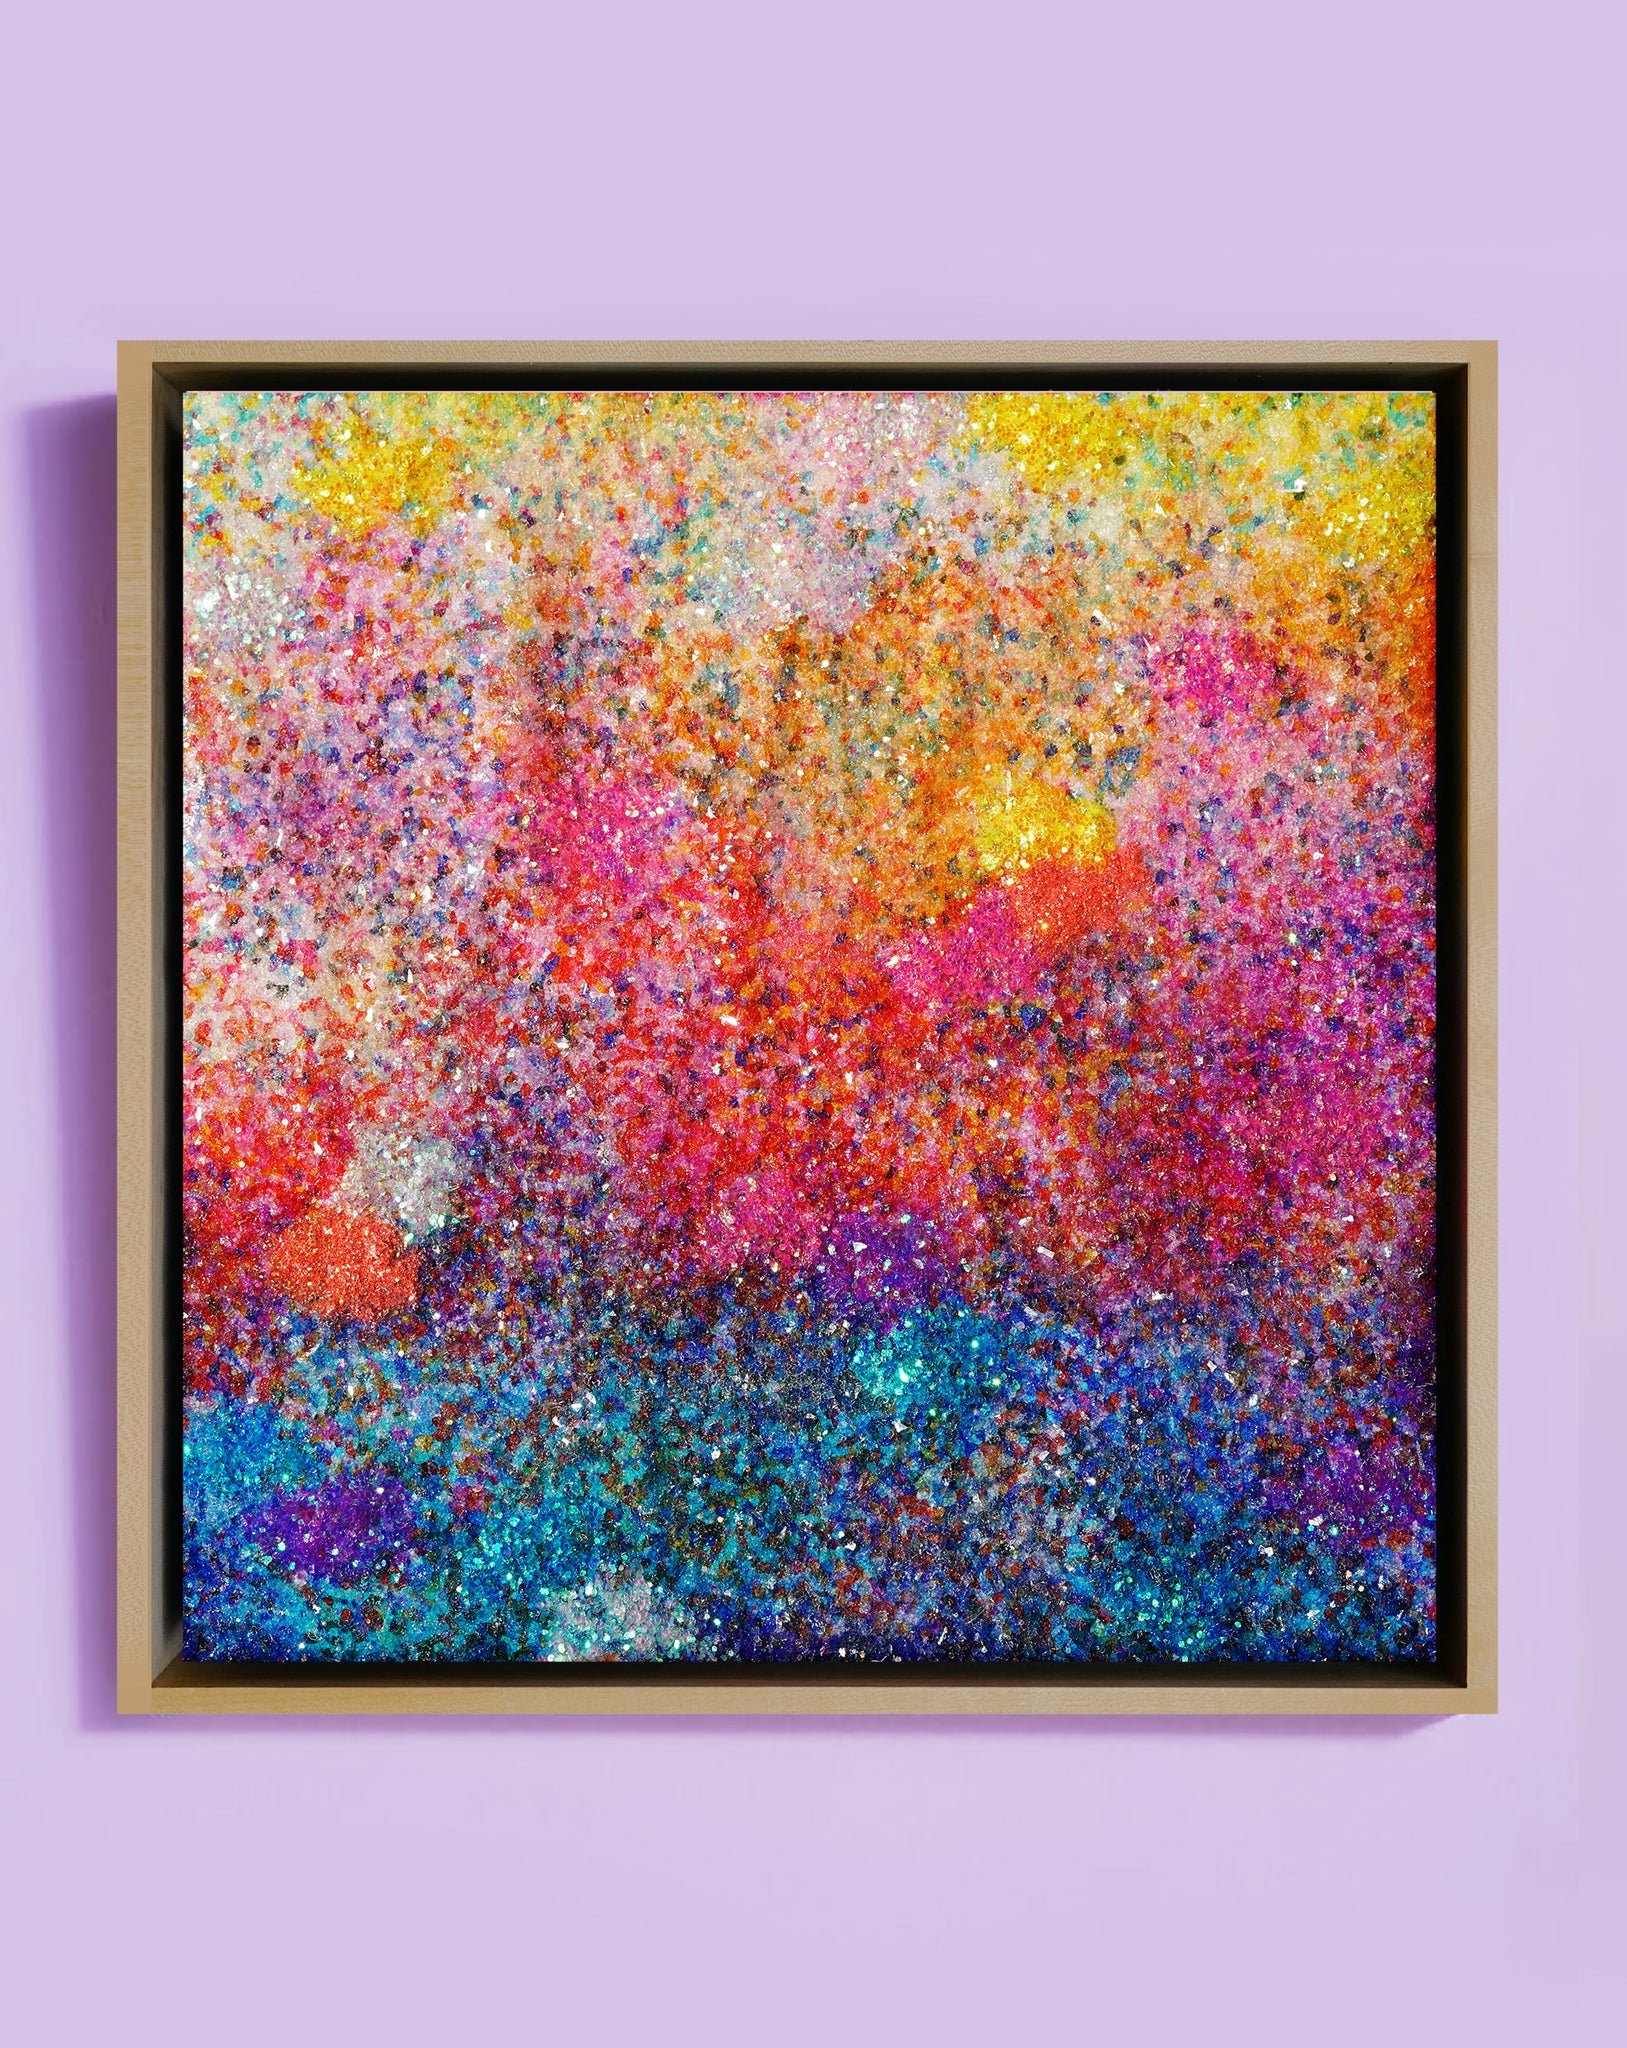 This Beautiful Sunset Reminds Me of You -11.25" X 11.25" X 2.5" Framed